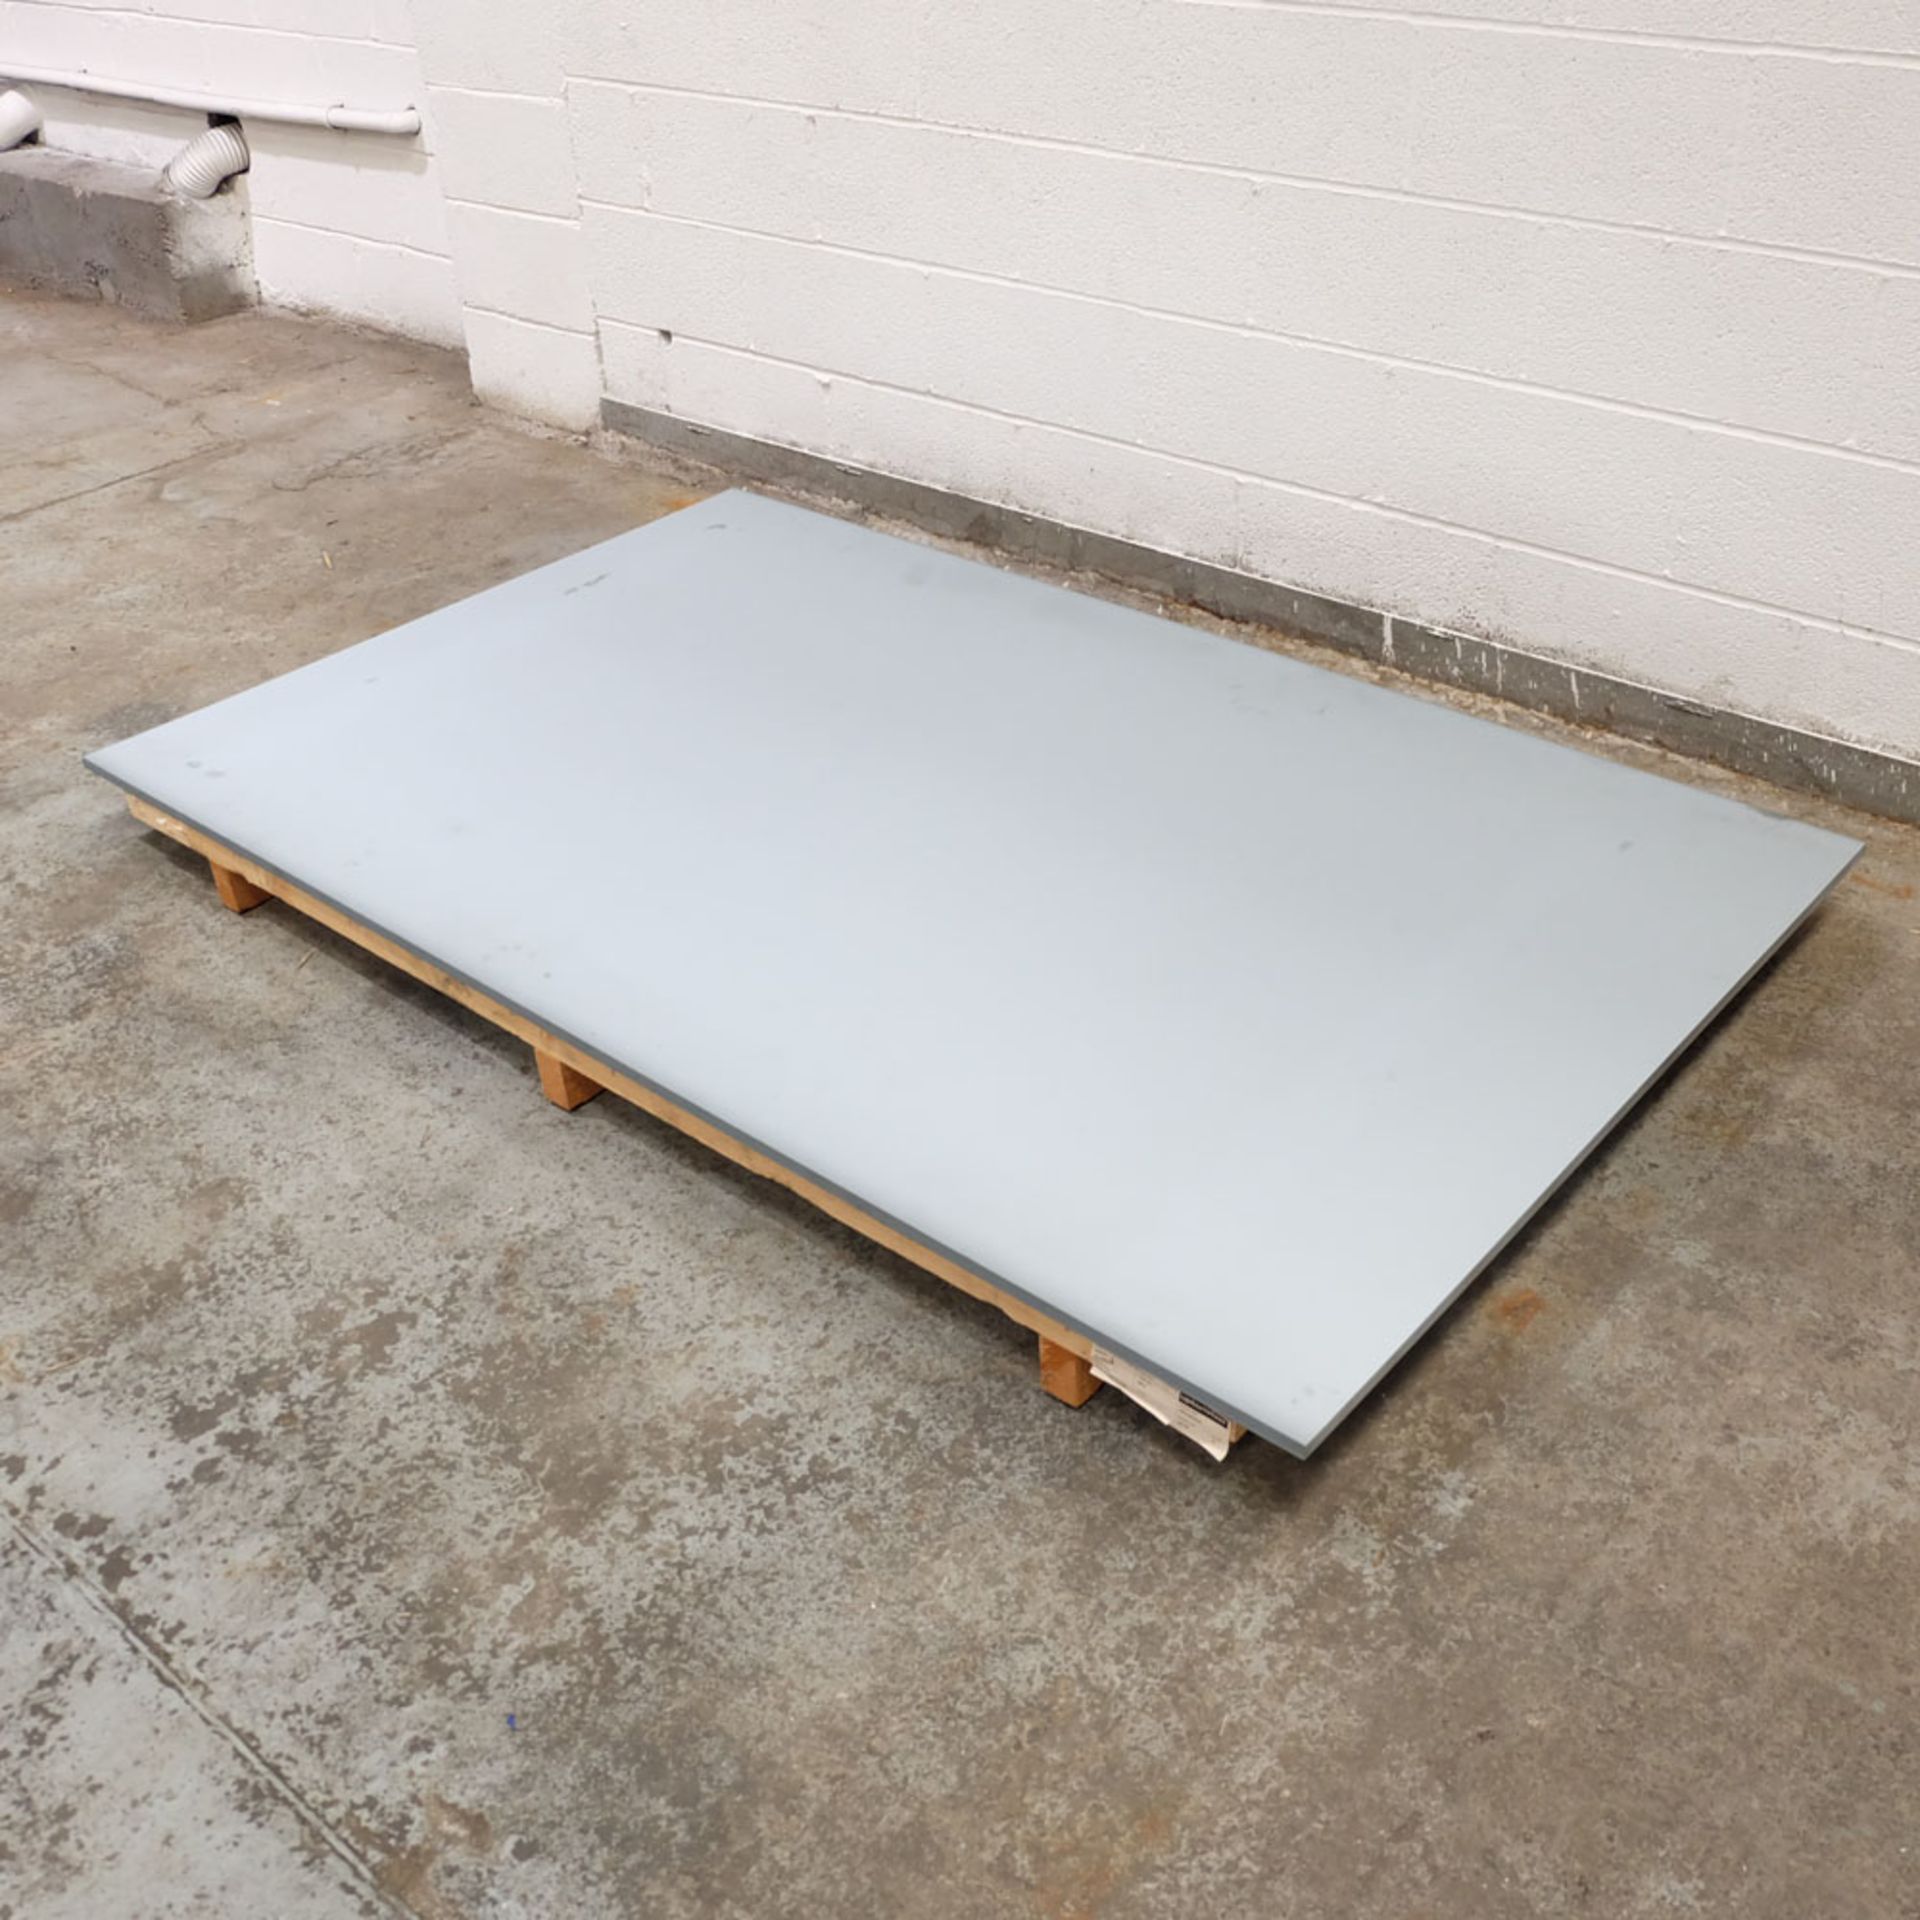 15 x Electro Zink Steel Sheets. Approx 2000mm x 1250mm x 1.20mm Thickness. - Image 3 of 4